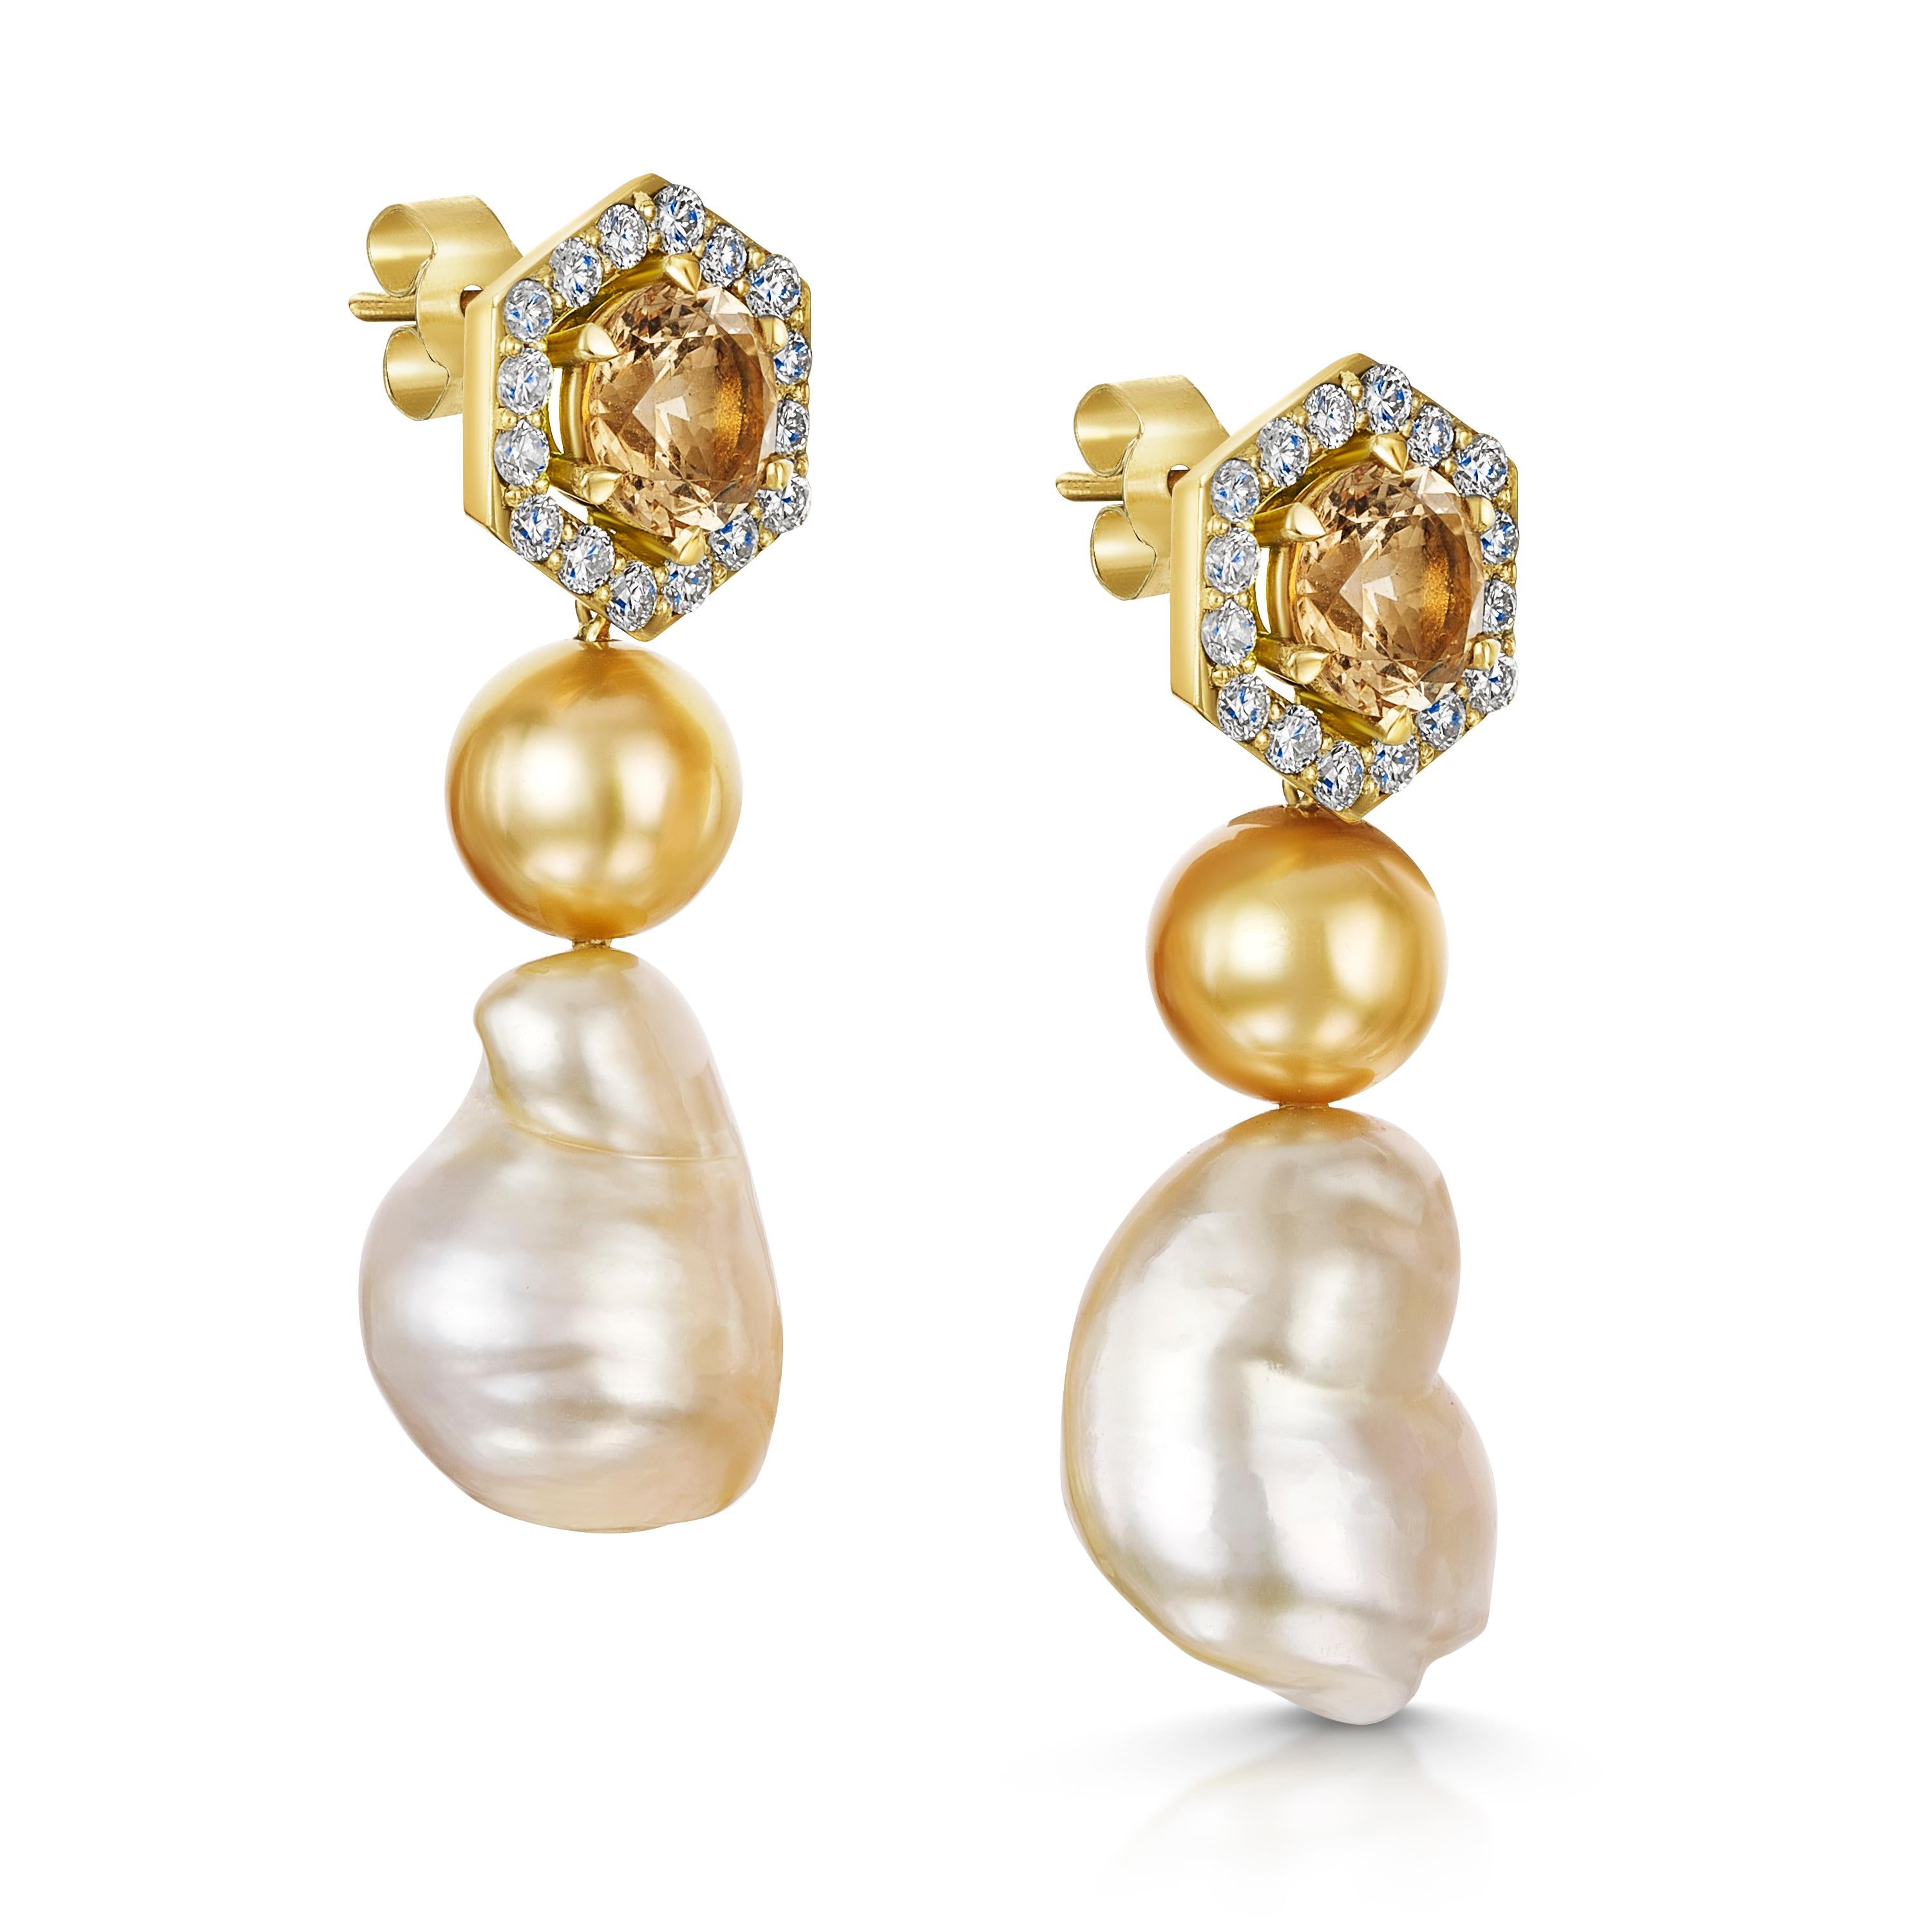 By Aventina-Spencer, these one-of-a-kind handcrafted earrings feature round brilliant cut Imperial Topaz centerstones surrounded by 0.85 carats of fine white diamonds (G/VS), 8mm round Conscious Golden South Sea Pearls and 15mm Conscious Golden